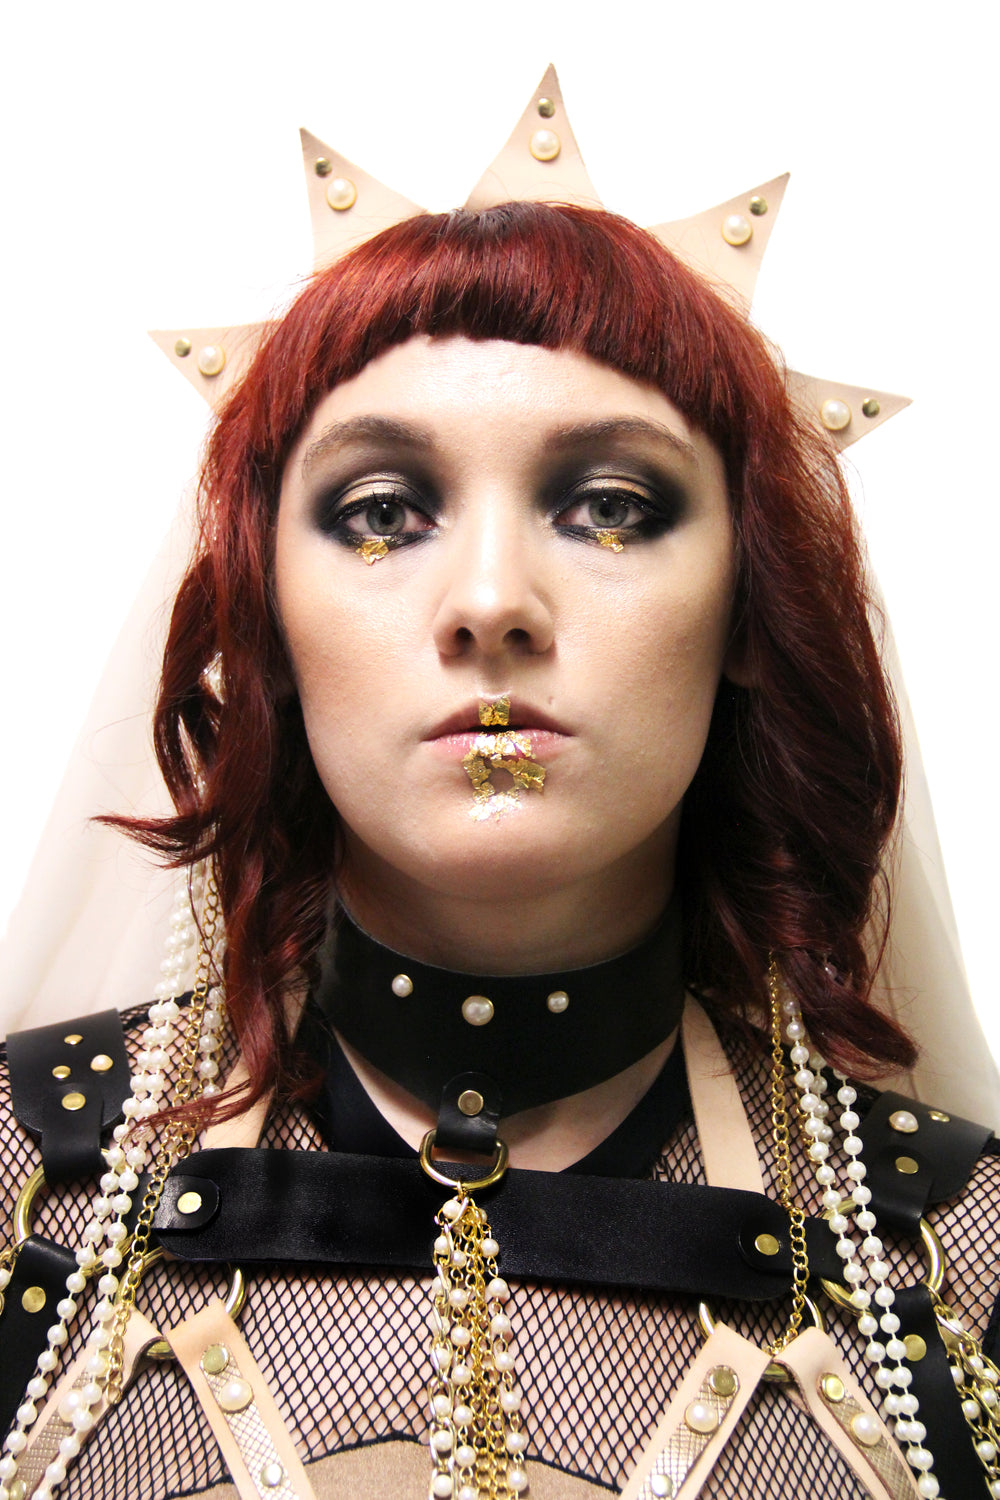 Heavily adorned model in gold foil makeup stares right into the camera. One of the accessories they are wearing is a pearl tassel choker.